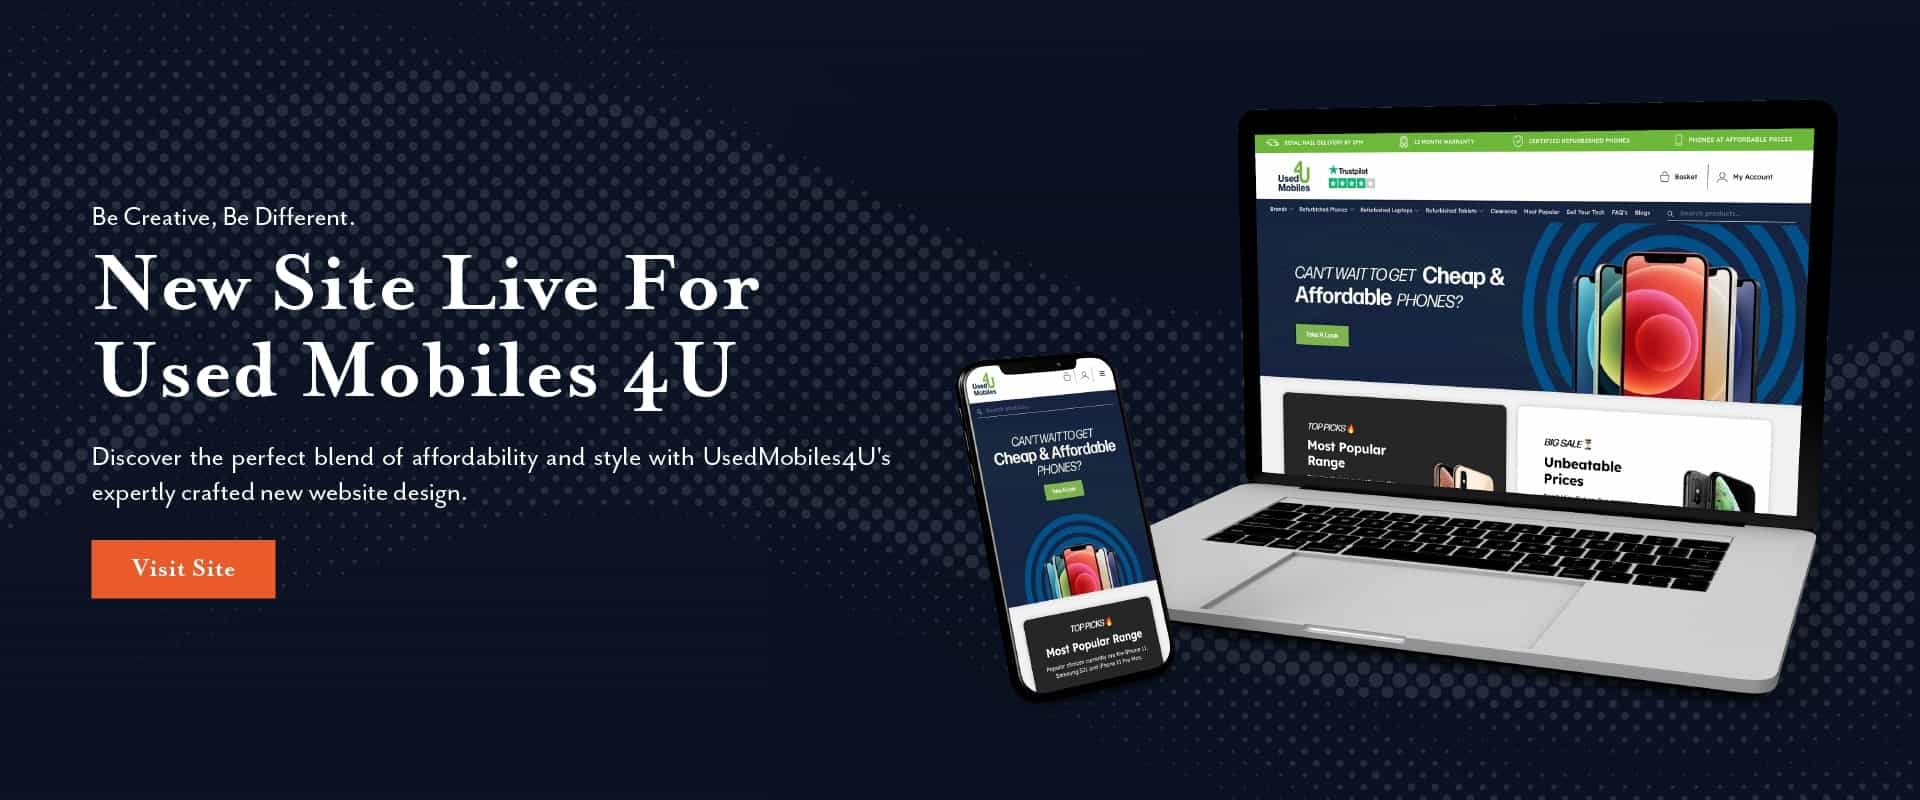 New Site Live For Used Mobiles 4 U. Discover the perfect blend of affordability and style with Used Mobile 4 U's expertly crafted new website design by Blue Whale Media.